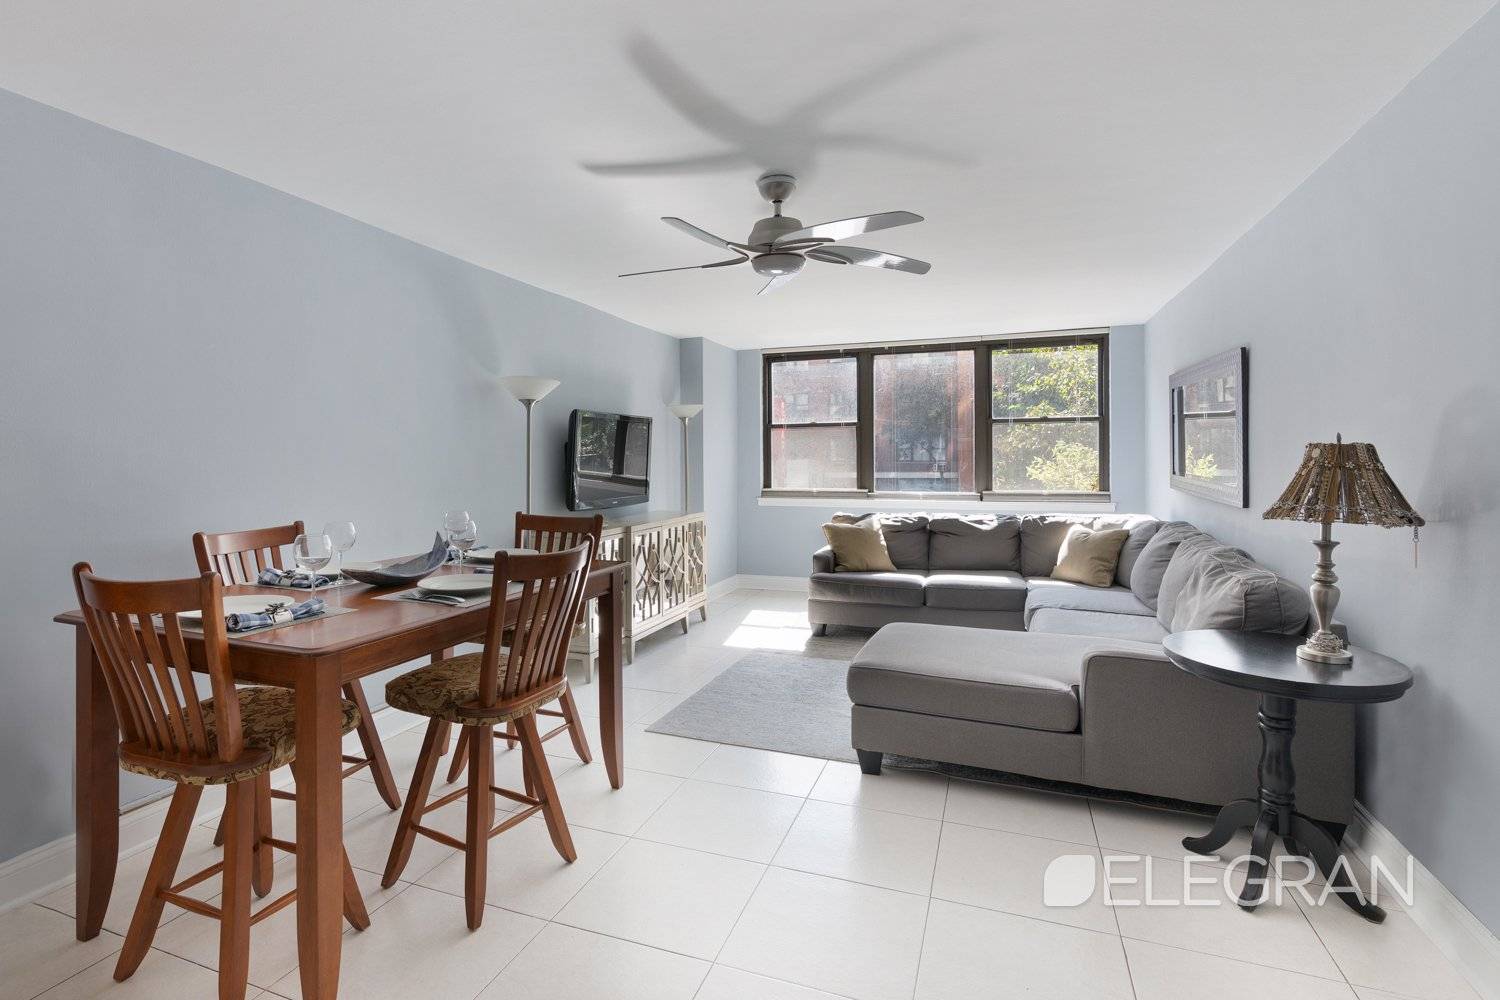 This beautiful one bedroom apartment is the perfect combination of space and value.